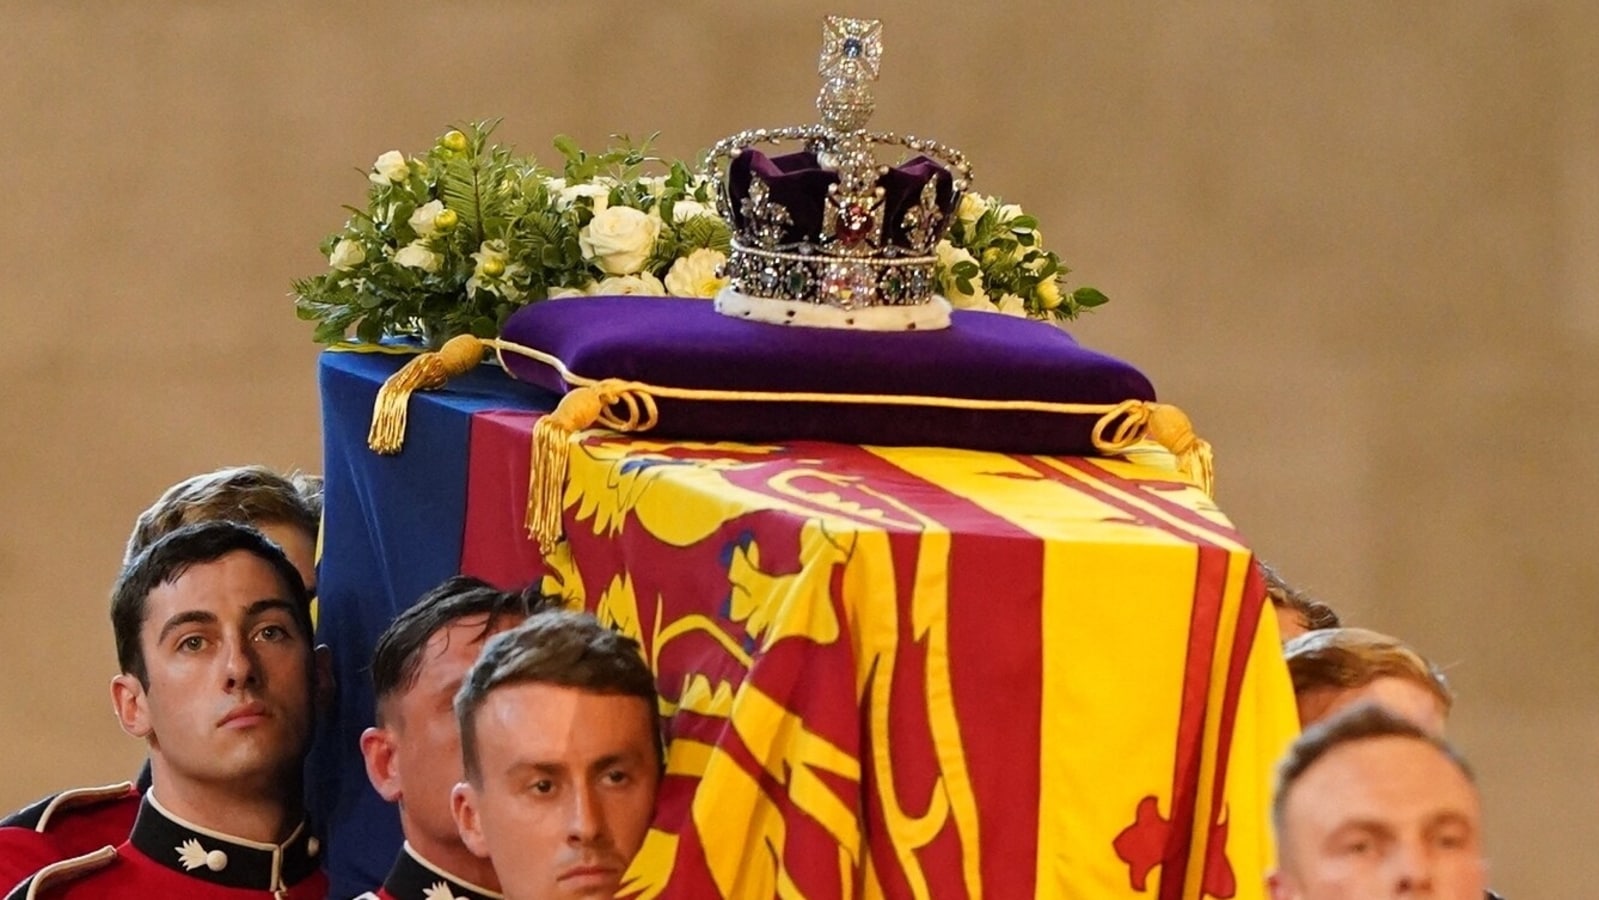 Six countries not invited to Queen Elizabeth II's funeral - See the complete list